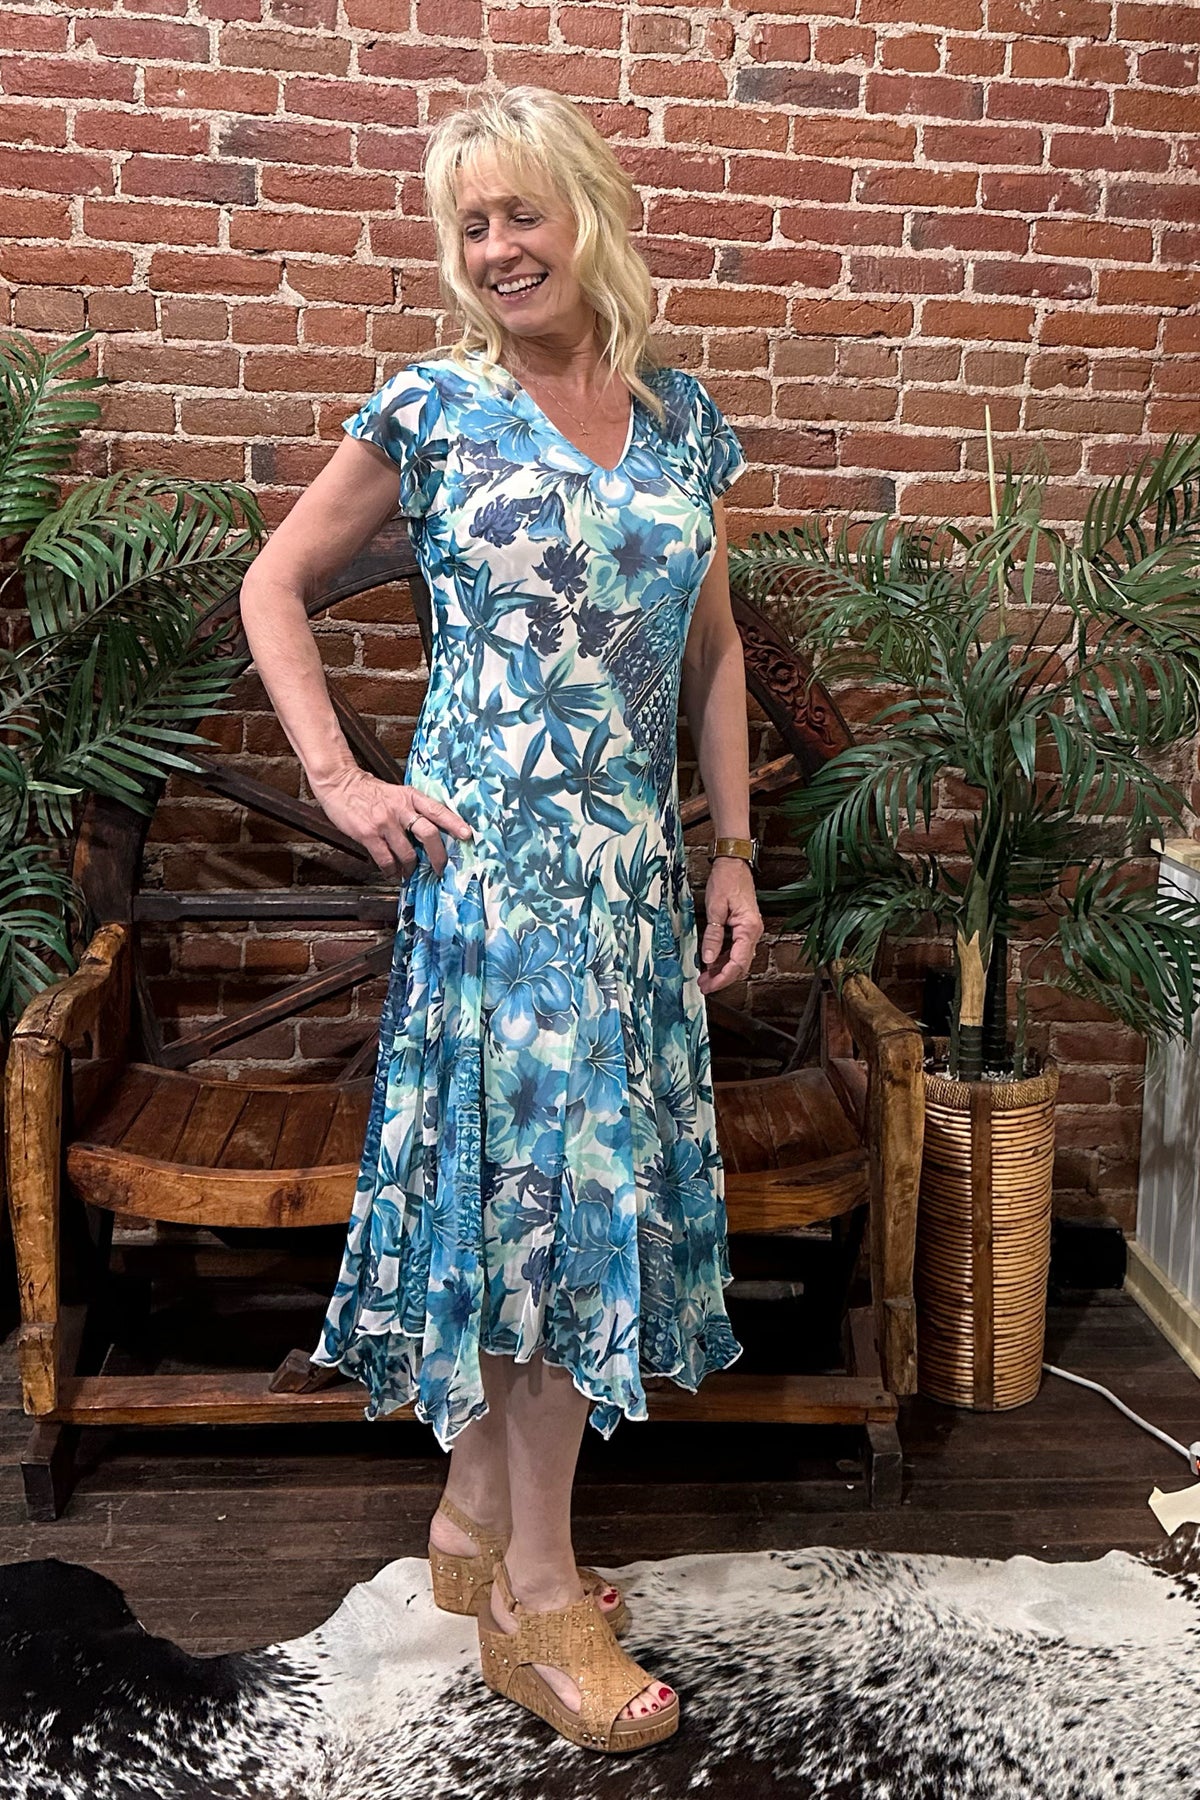 Blue Floral Print Dress with Gold Detailing-Dress-Lazy Daisy-Gallop 'n Glitz- Women's Western Wear Boutique, Located in Grants Pass, Oregon